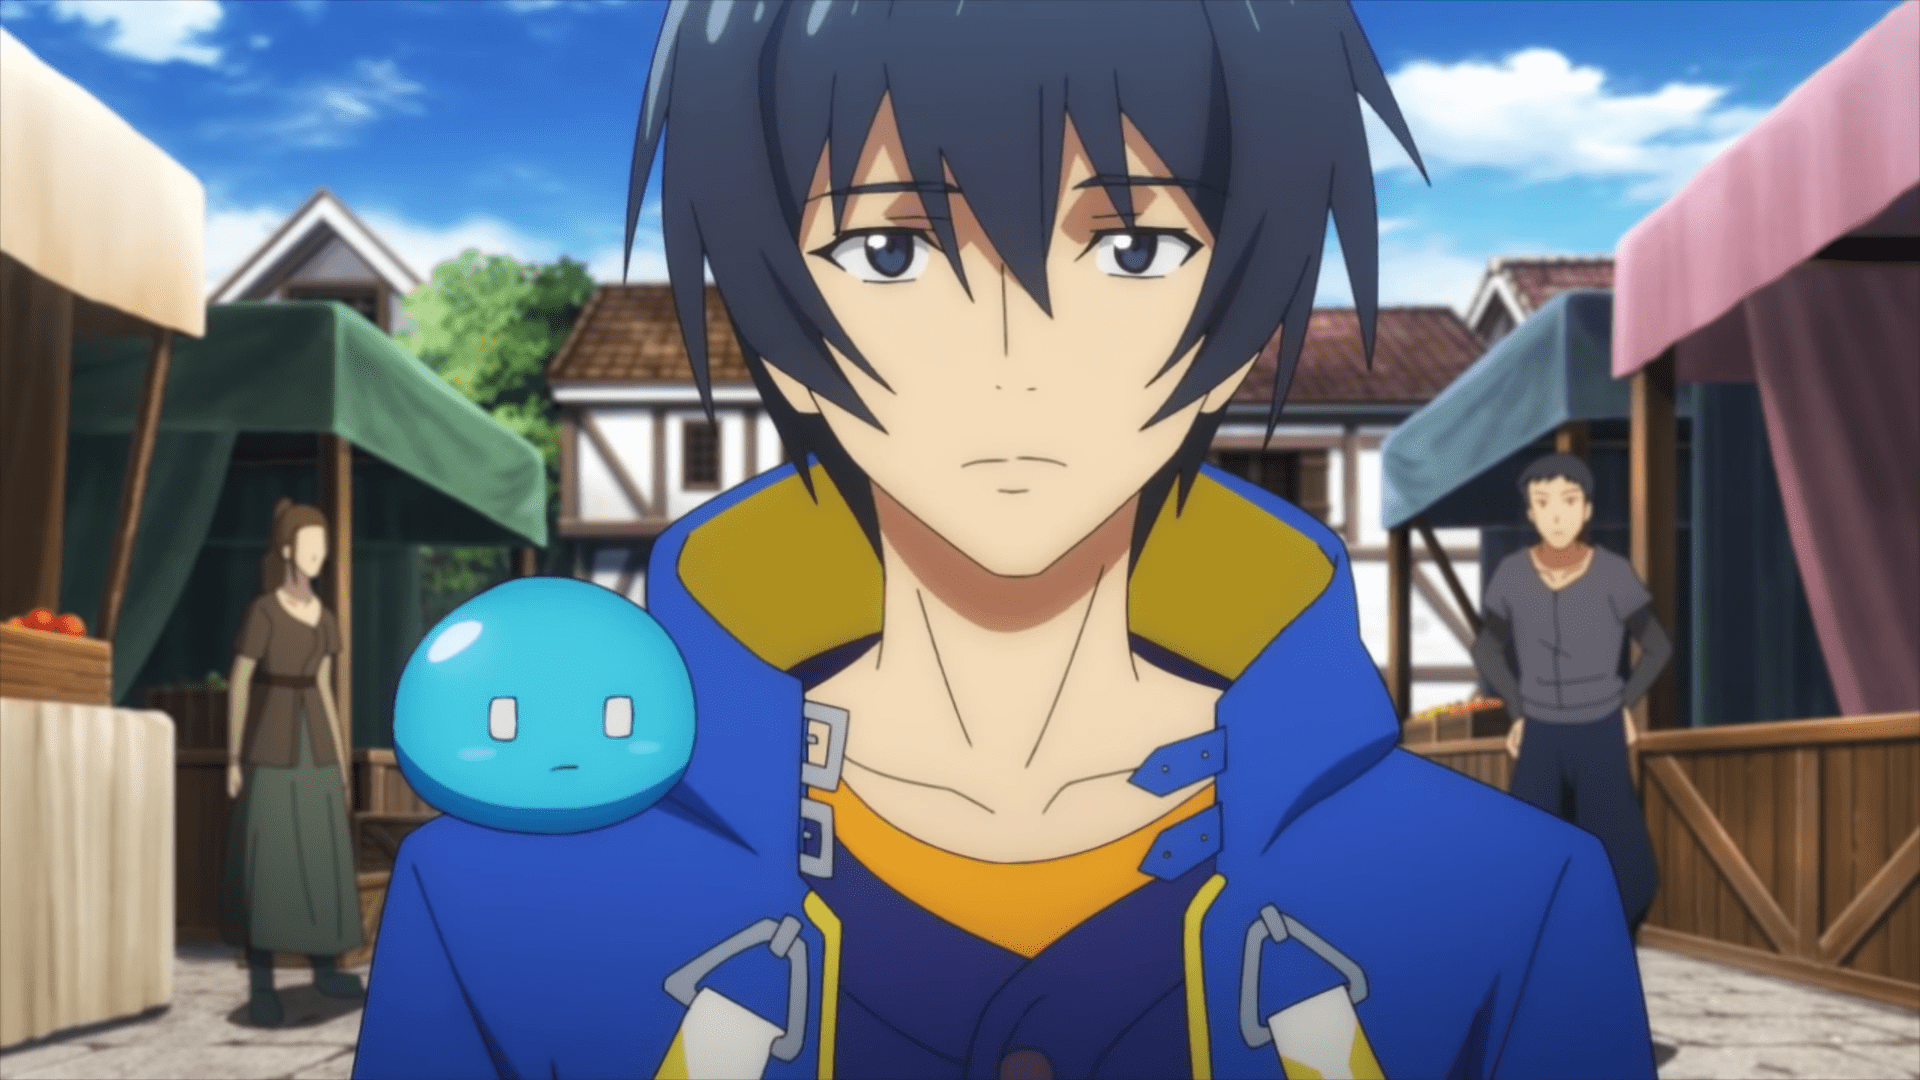 My Isekai Life's New Previews Slimes and Action